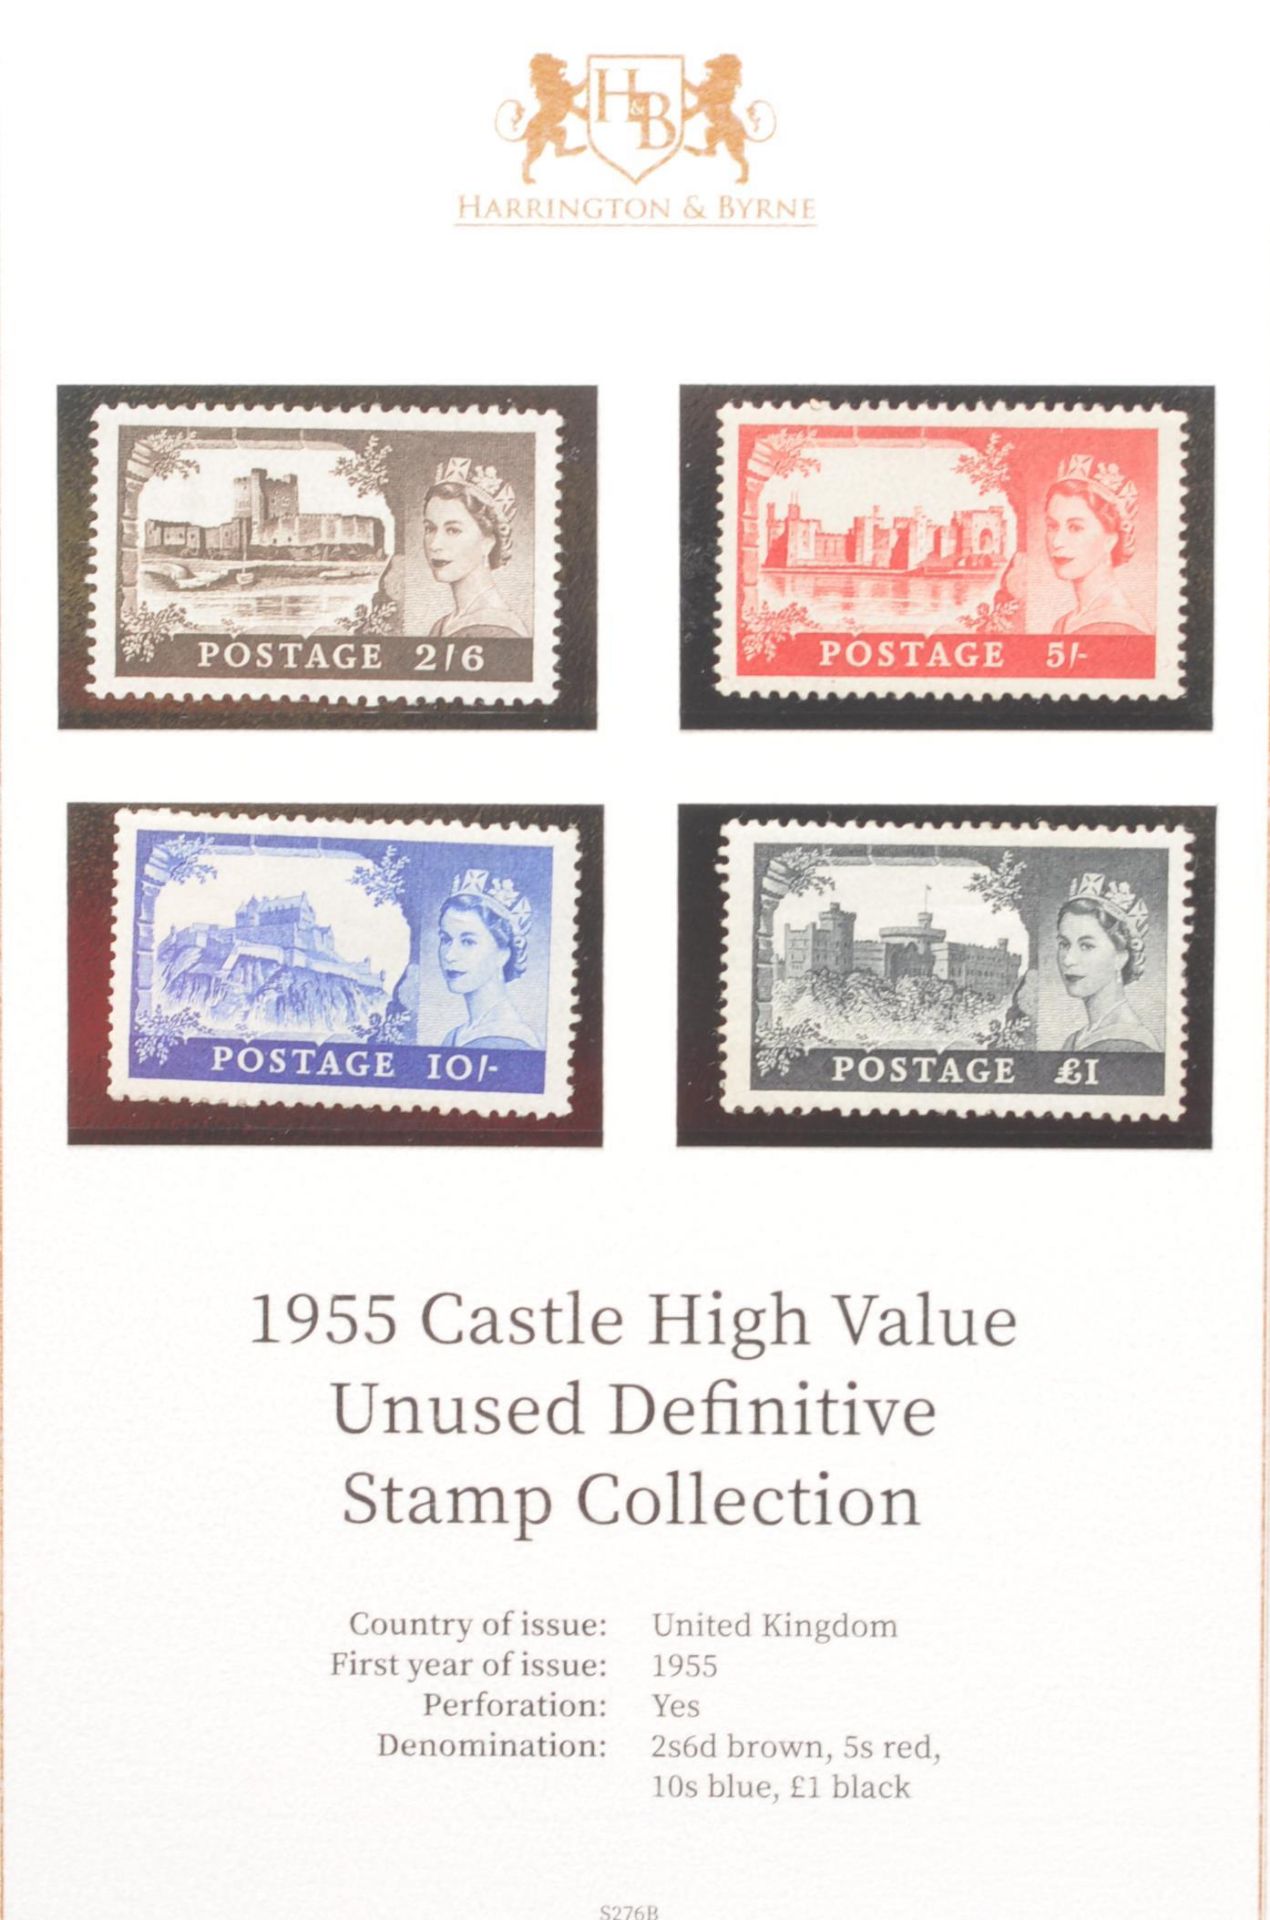 STAMPS - 1955 CASTLE HIGH VALUE UNUSED DEFINITIVE STAMP COLLECTION - Image 3 of 4